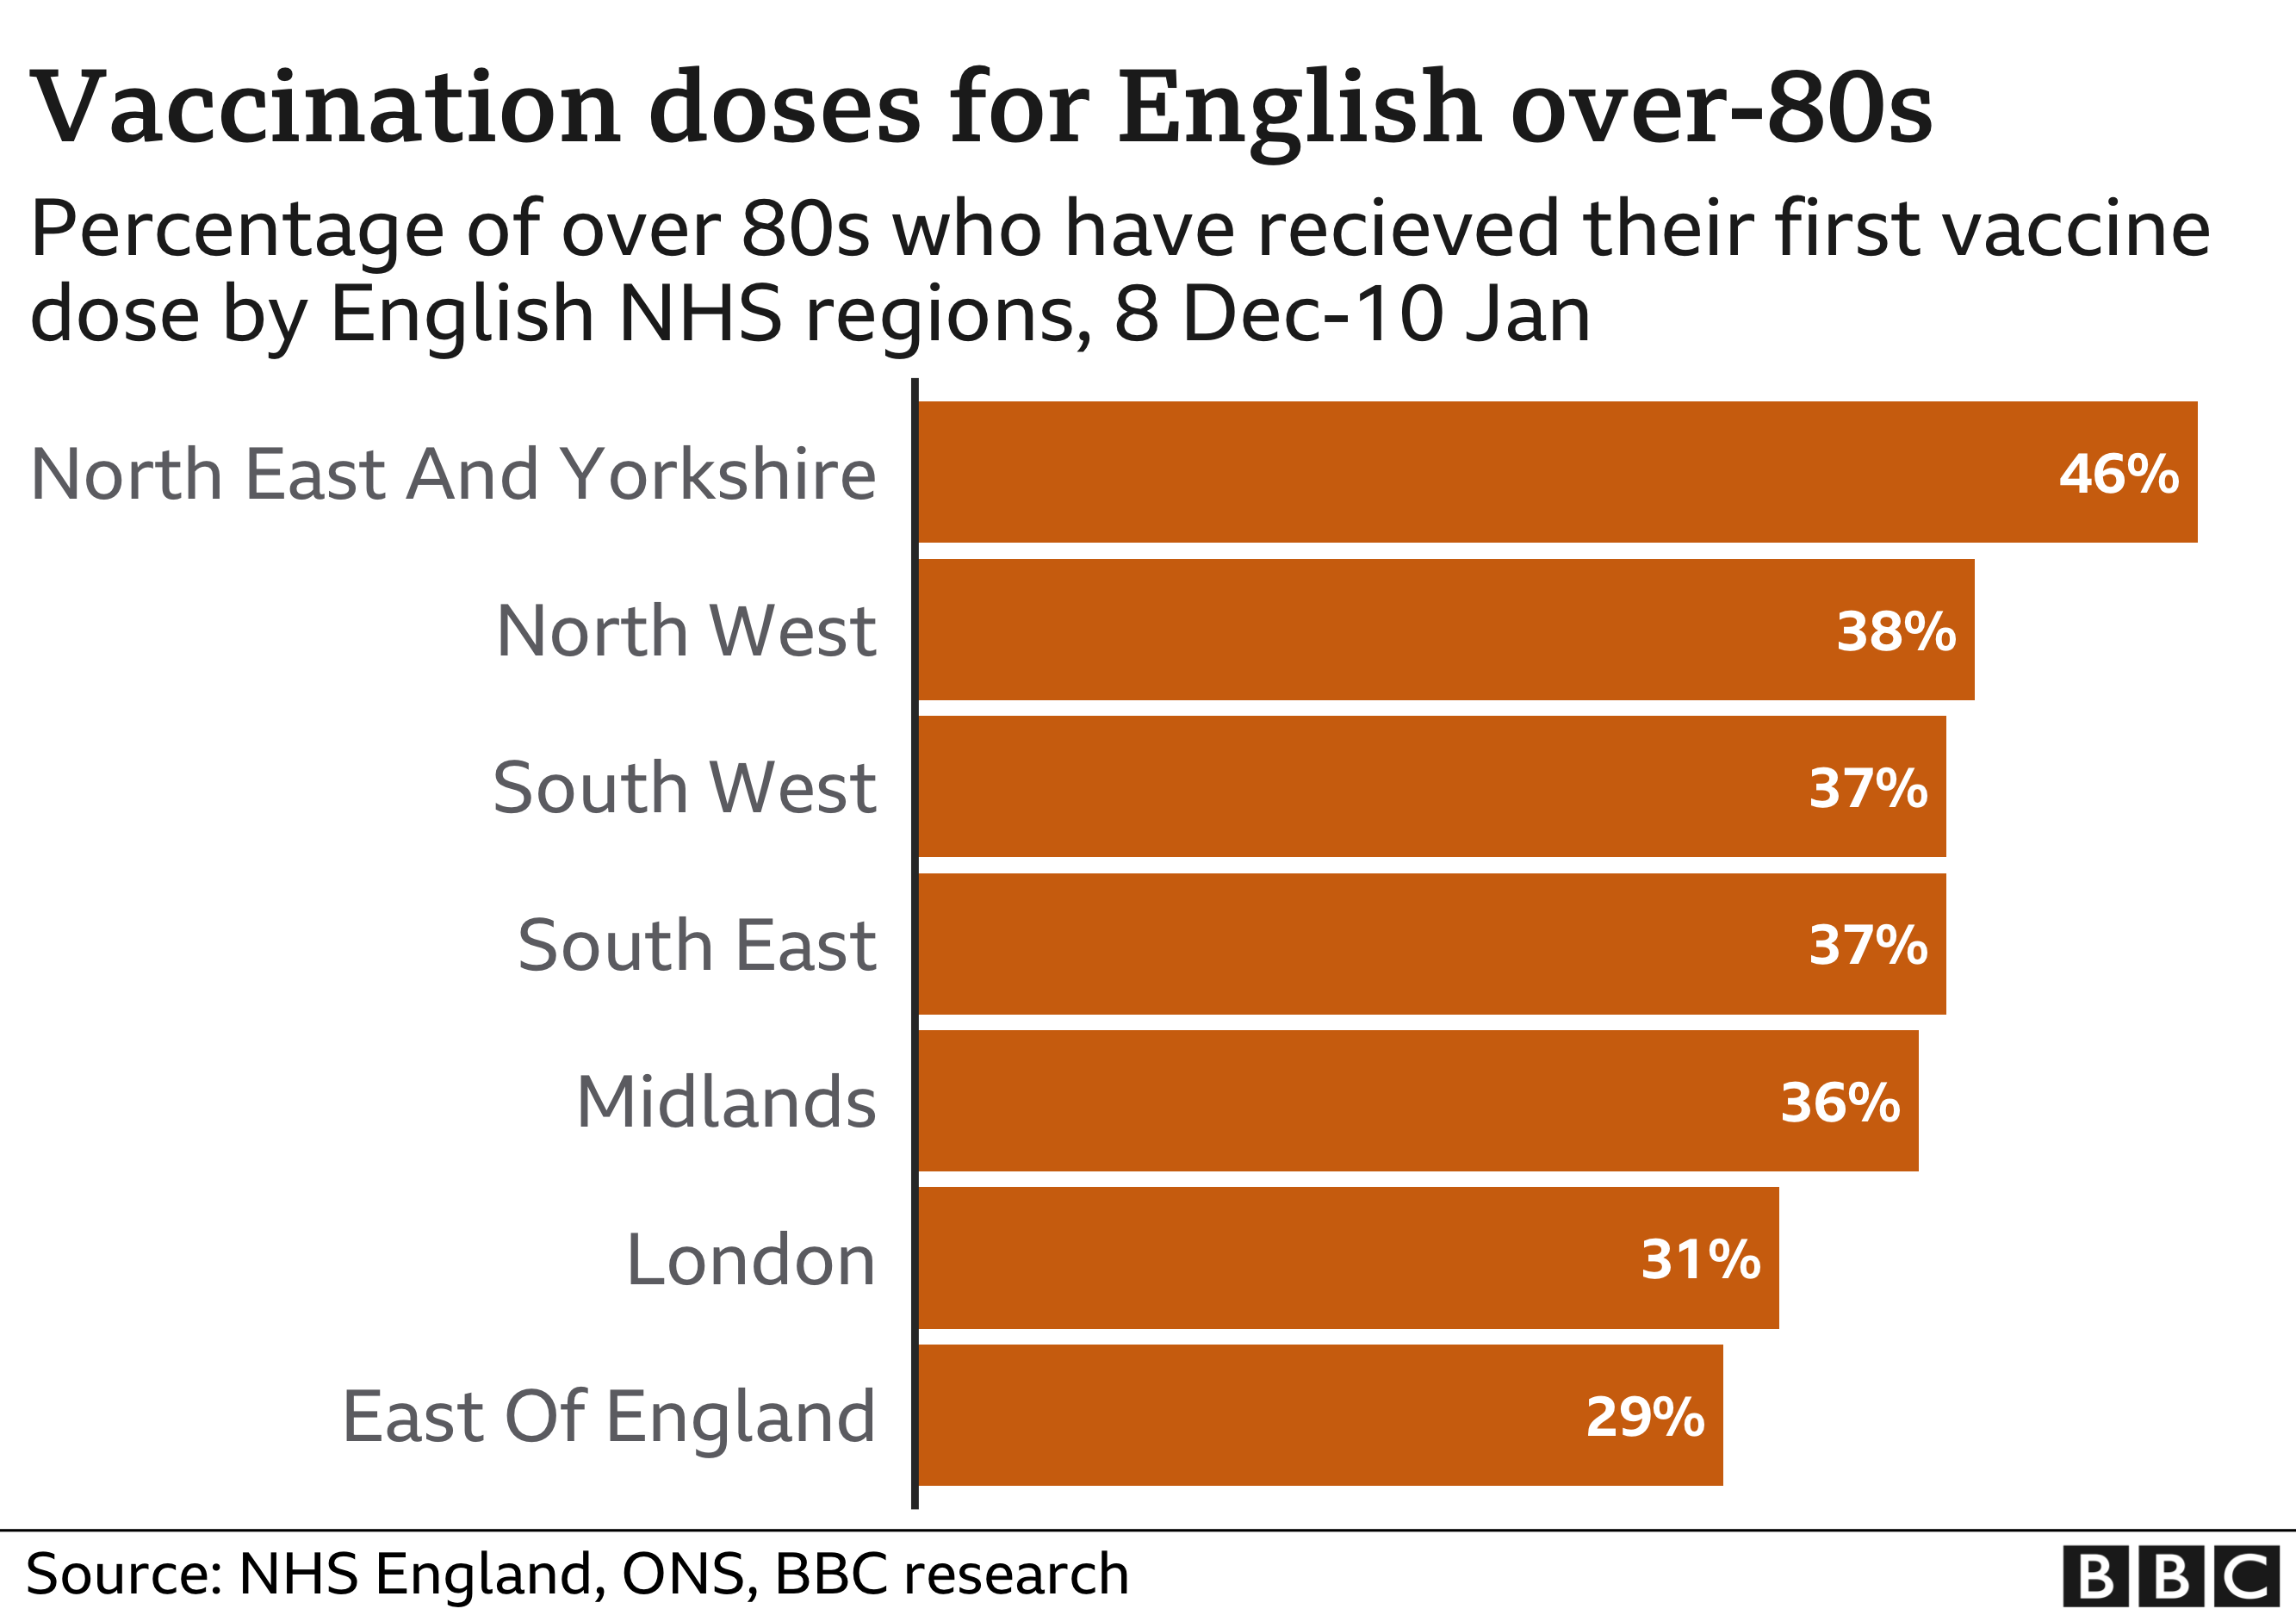 Graph showing the the percentage of over 80s vaccinated against Covid-19 for each region in England